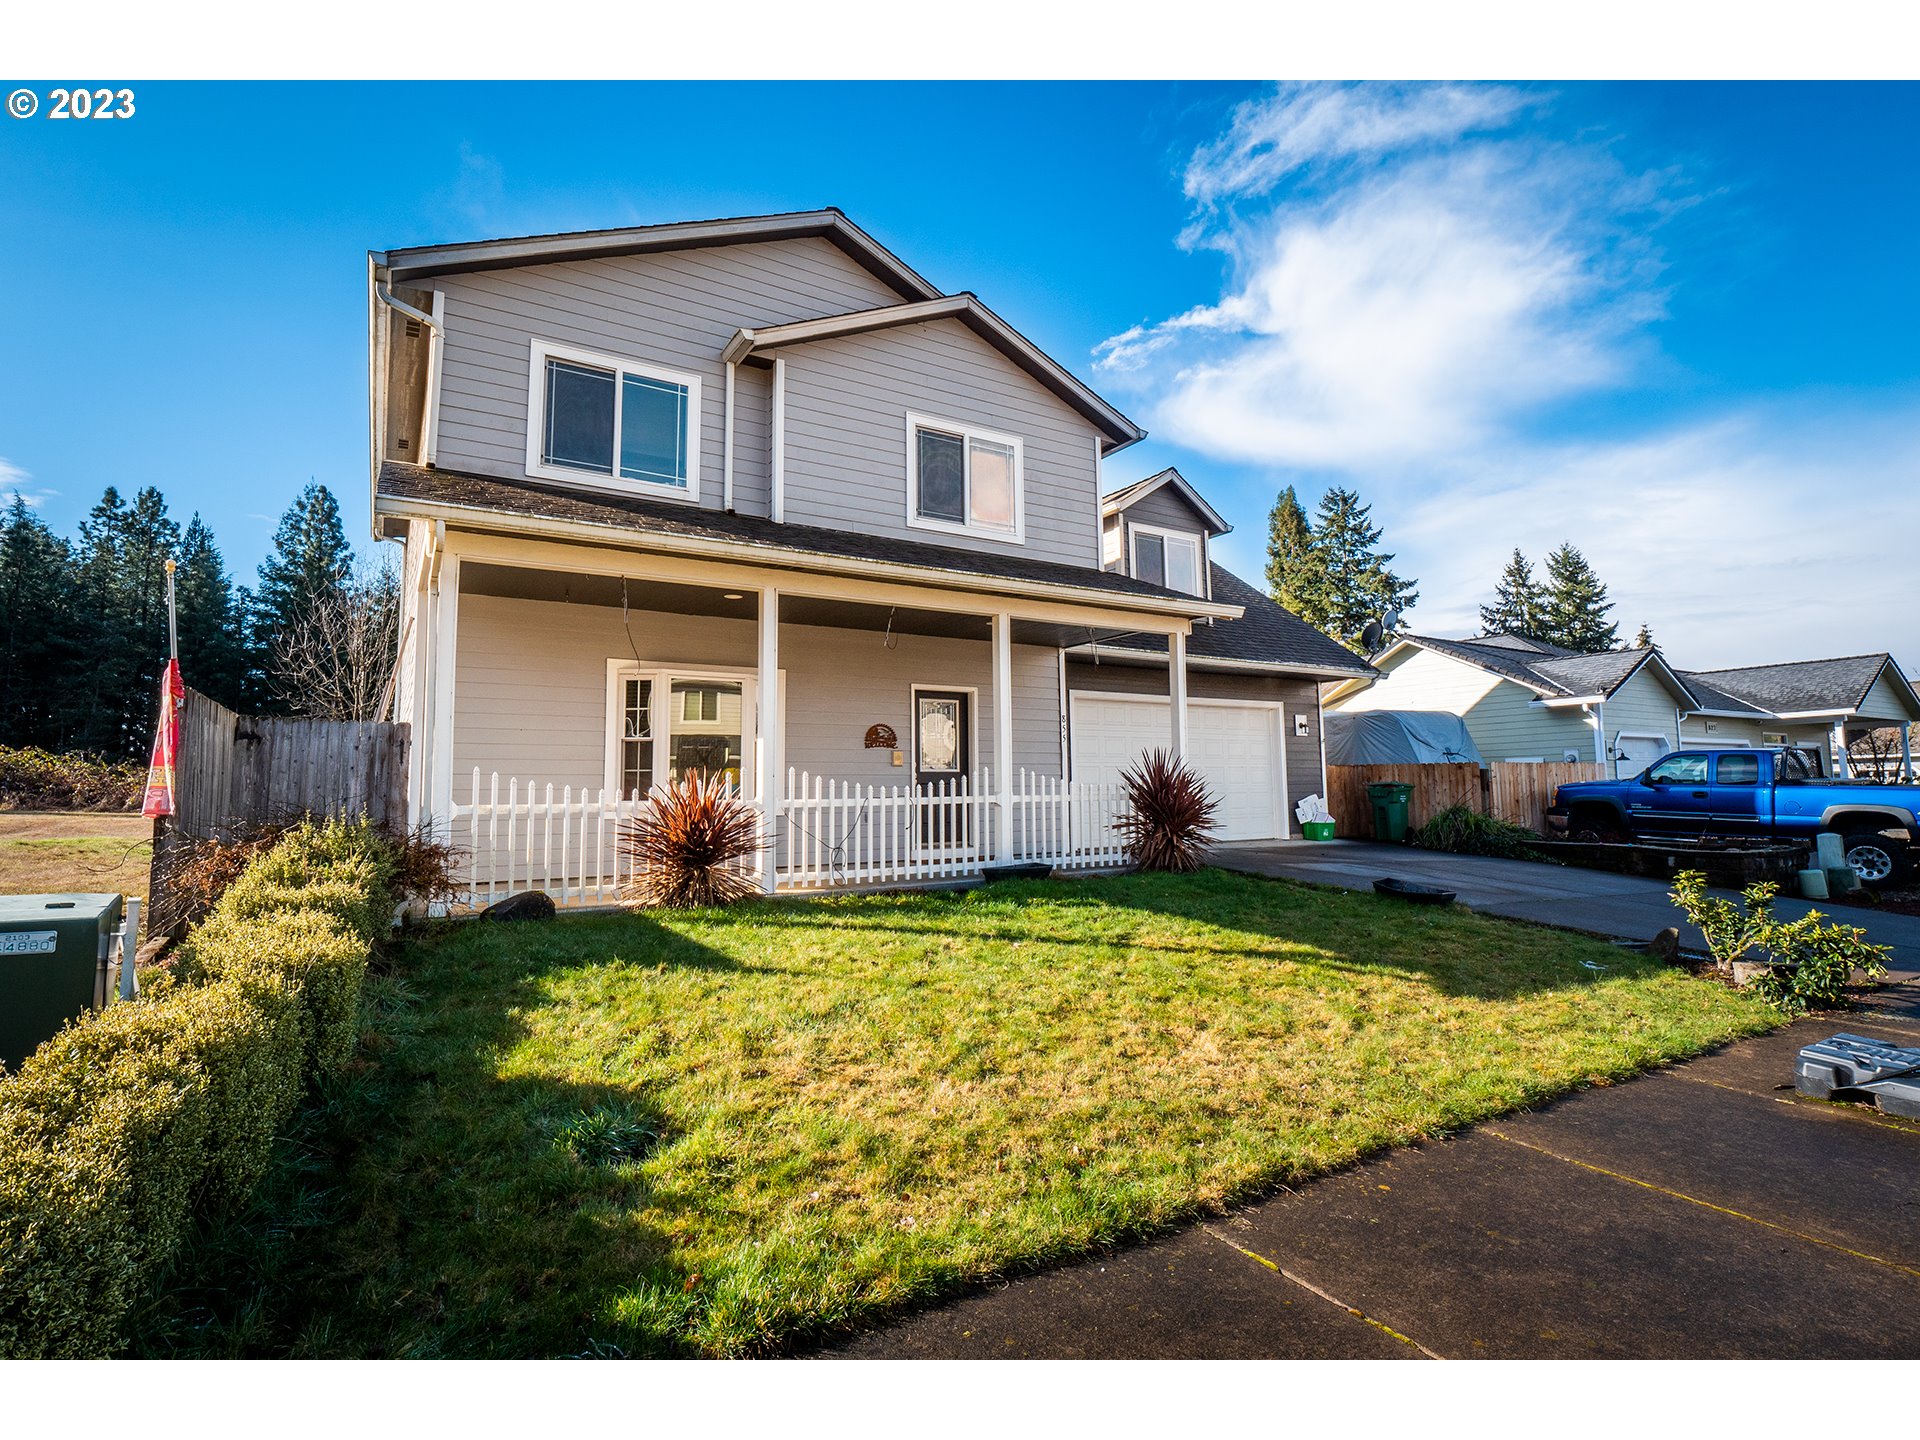 855 Yoss PL, Cottage Grove, OR 97424